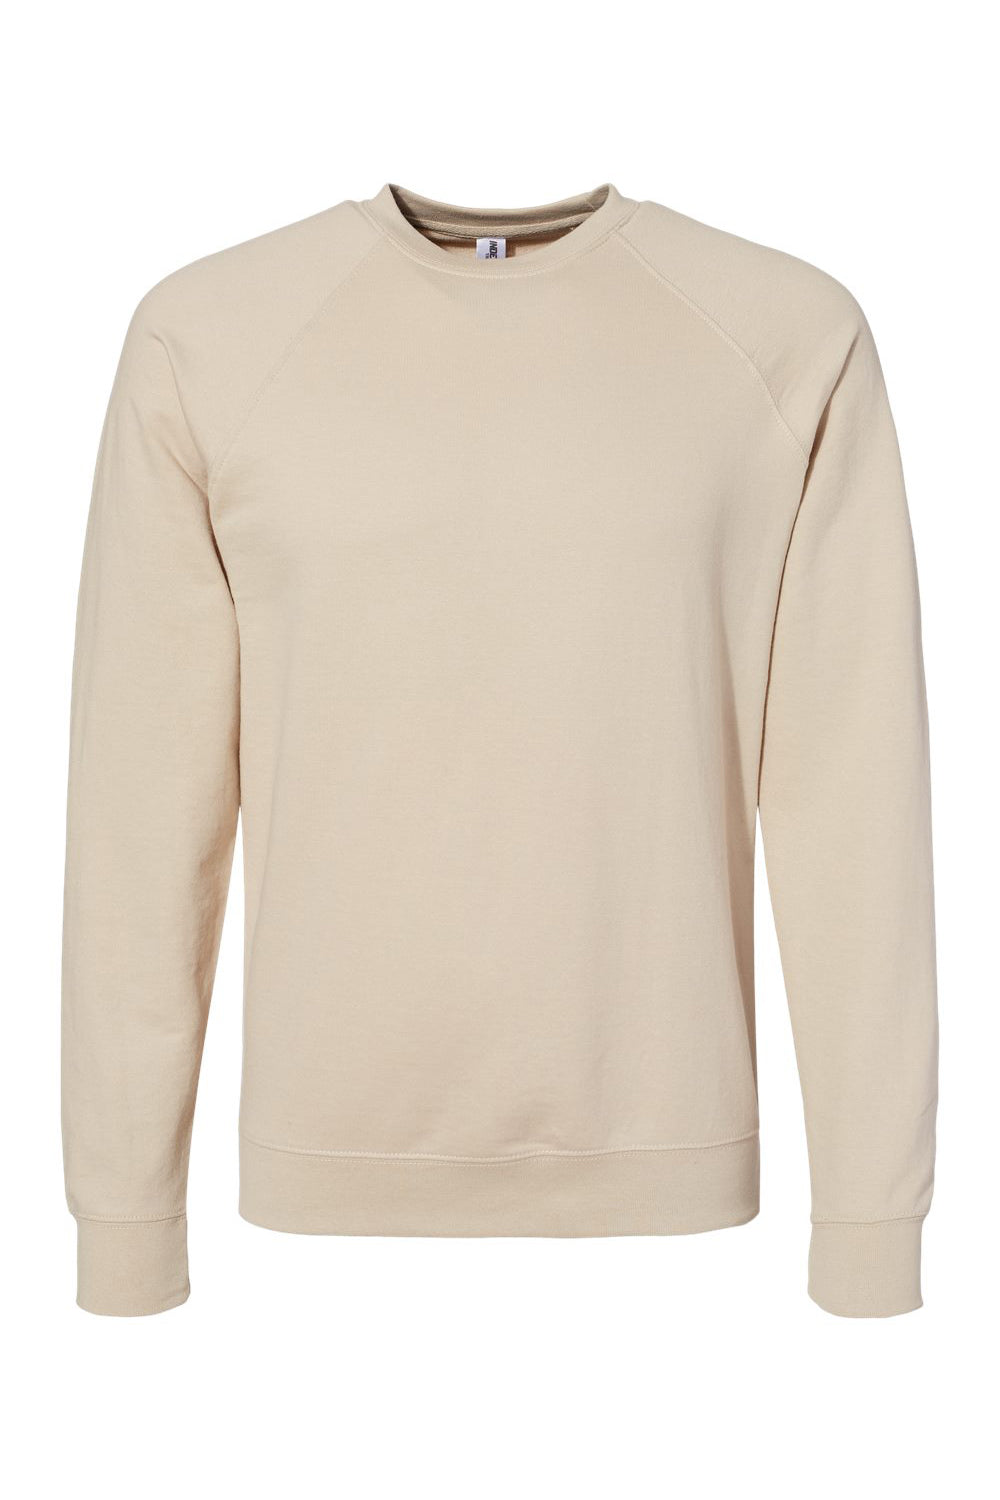 Independent Trading Co. SS1000C Mens Icon Loopback Terry Crewneck Sweatshirt Sand Flat Front